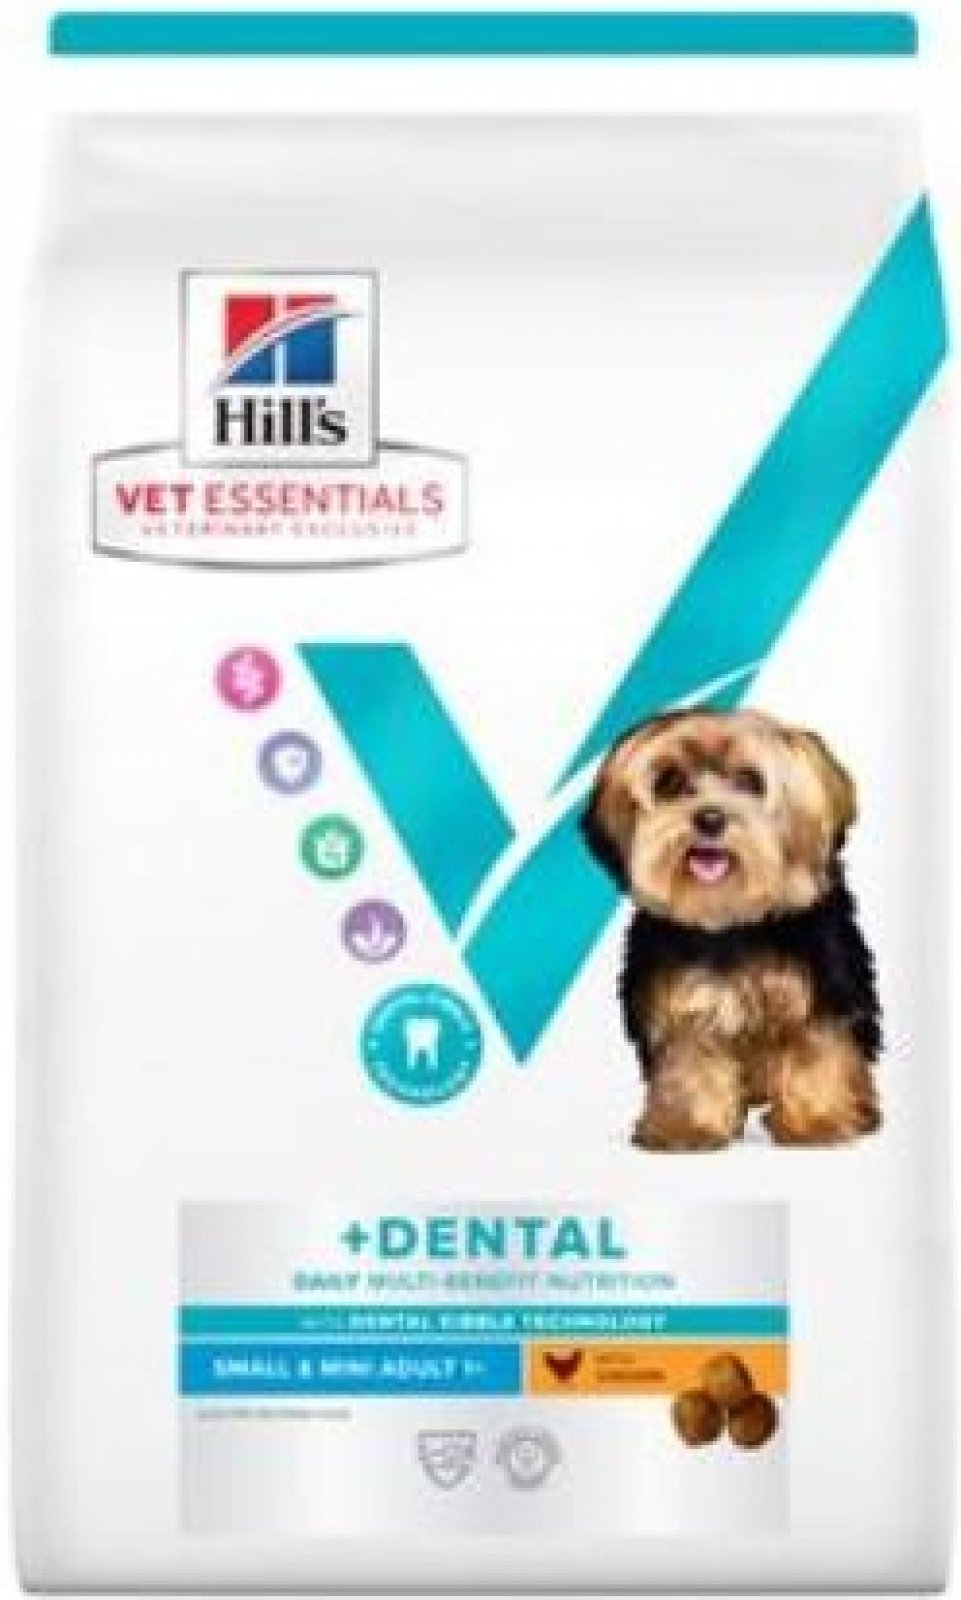 Hill's VetEssentials Canine DENTAL Adult Small chicken 2 kg